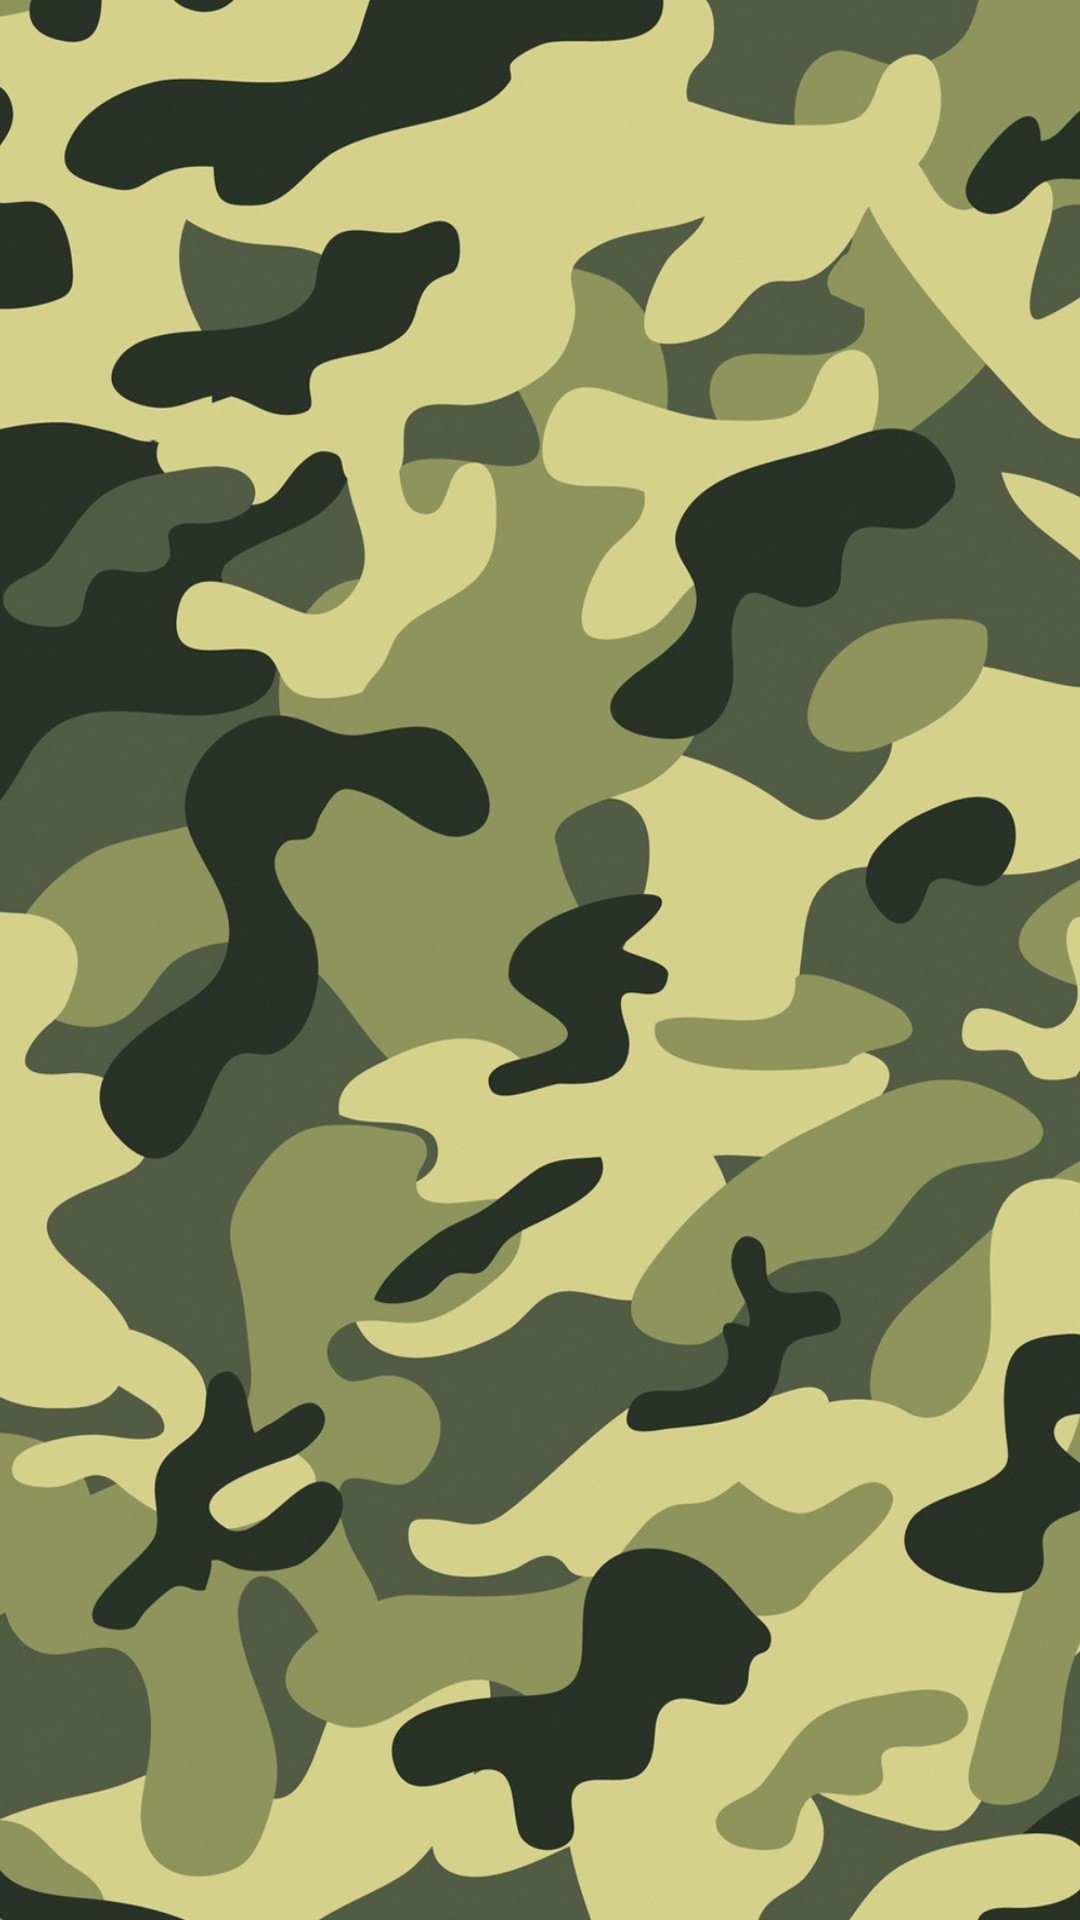 Camouflage wallpaper for iPhone or Android. Tags camo, hunting, army, backgrounds